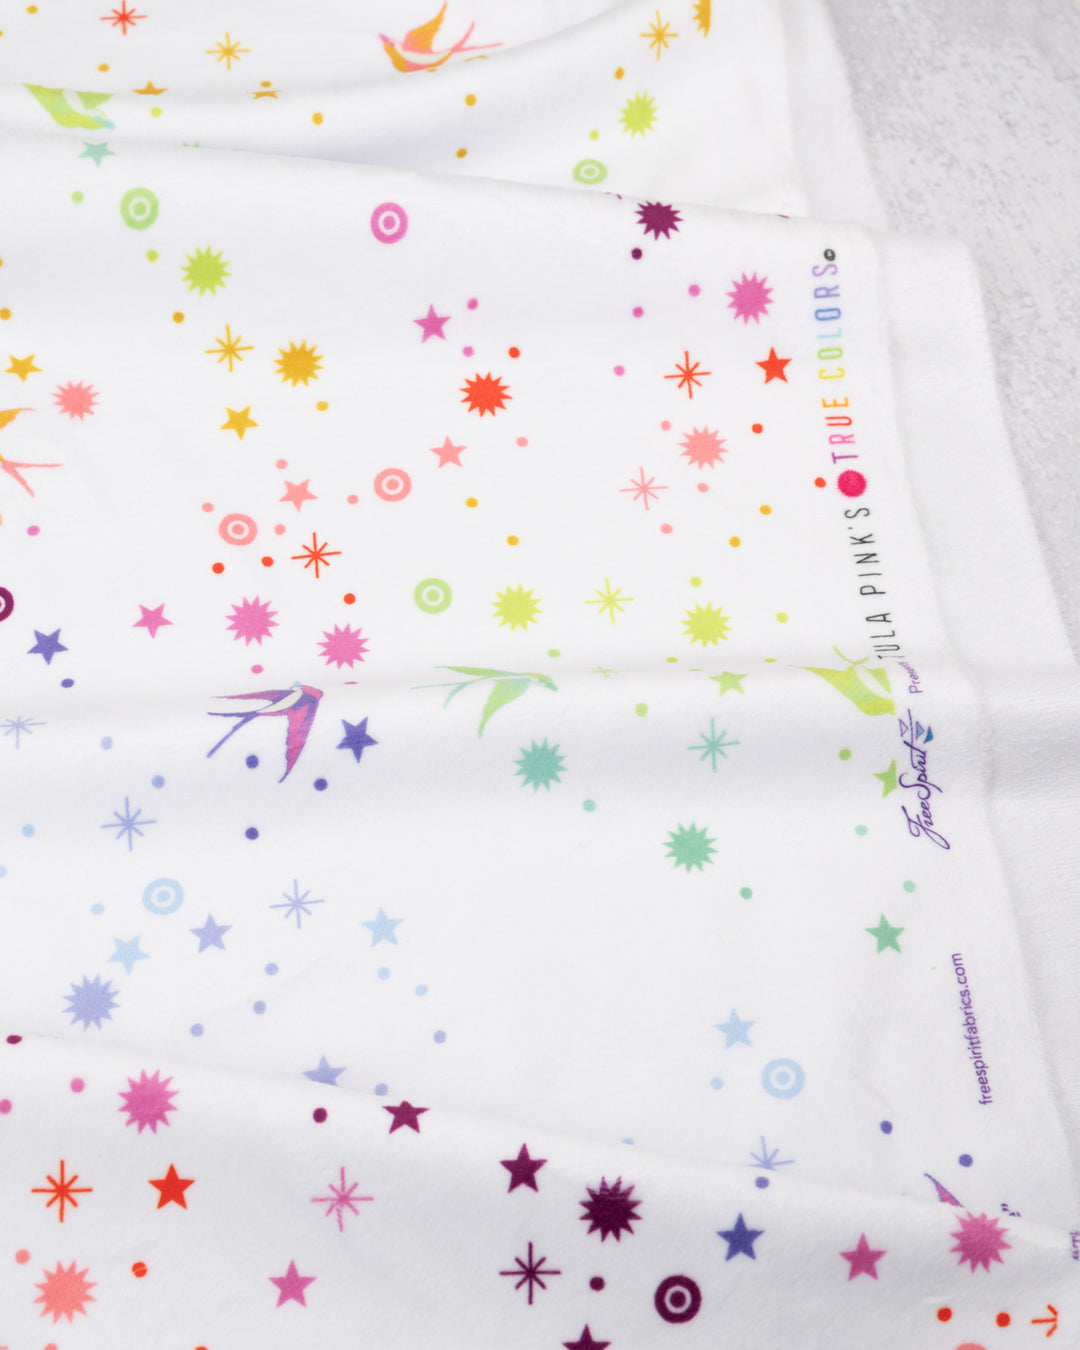 PREORDER - True Colors - MINKY - Fairy Dust in White - Tula Pink - MKTP005.WHITE - Half Yard